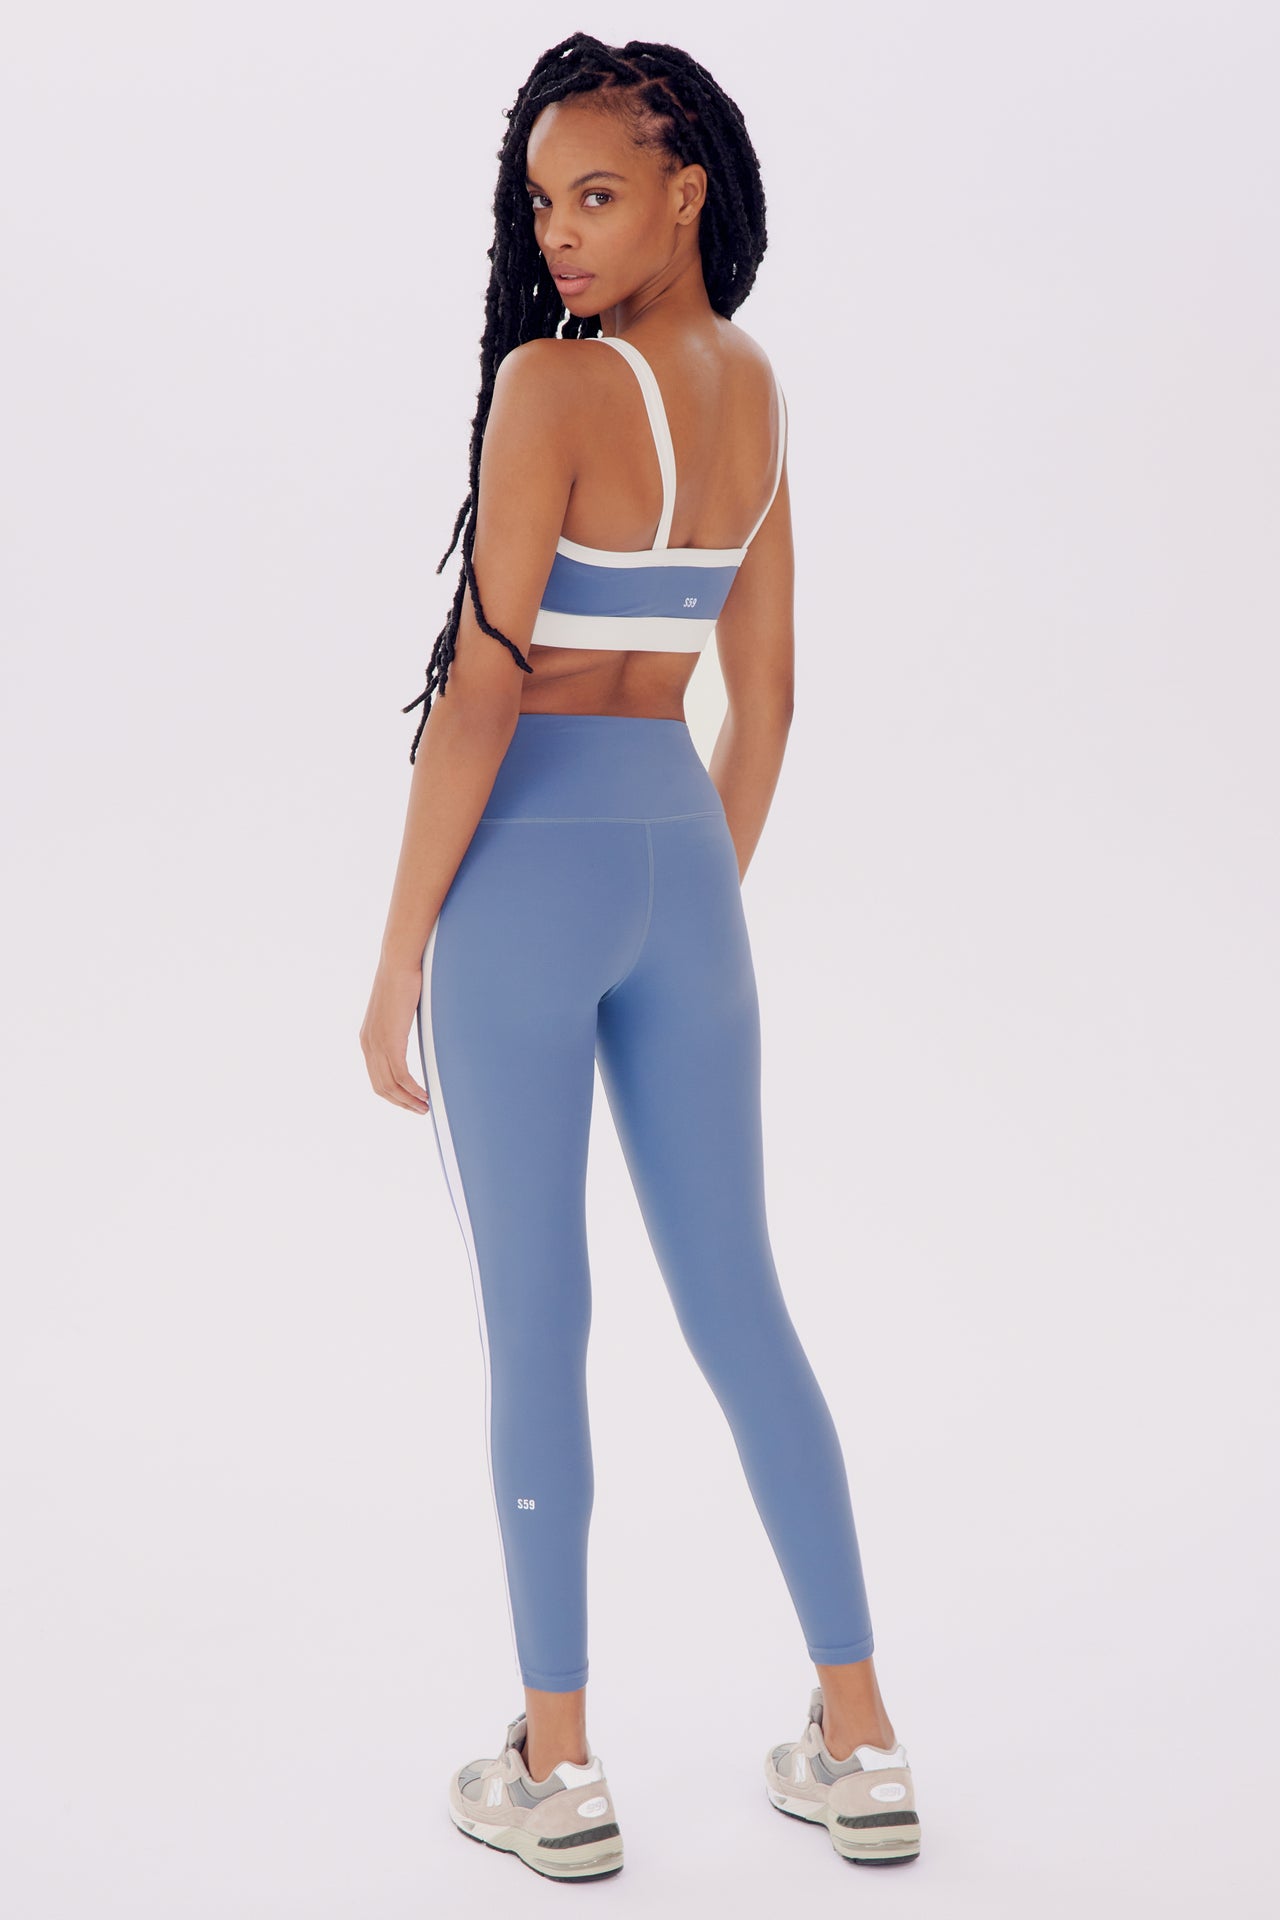 A woman in SPLITS59's Clare High Waist Rigor 7/8 - Steel Blue/White sports bra and high waist leggings turns her head to look over her shoulder, posing against a white background.